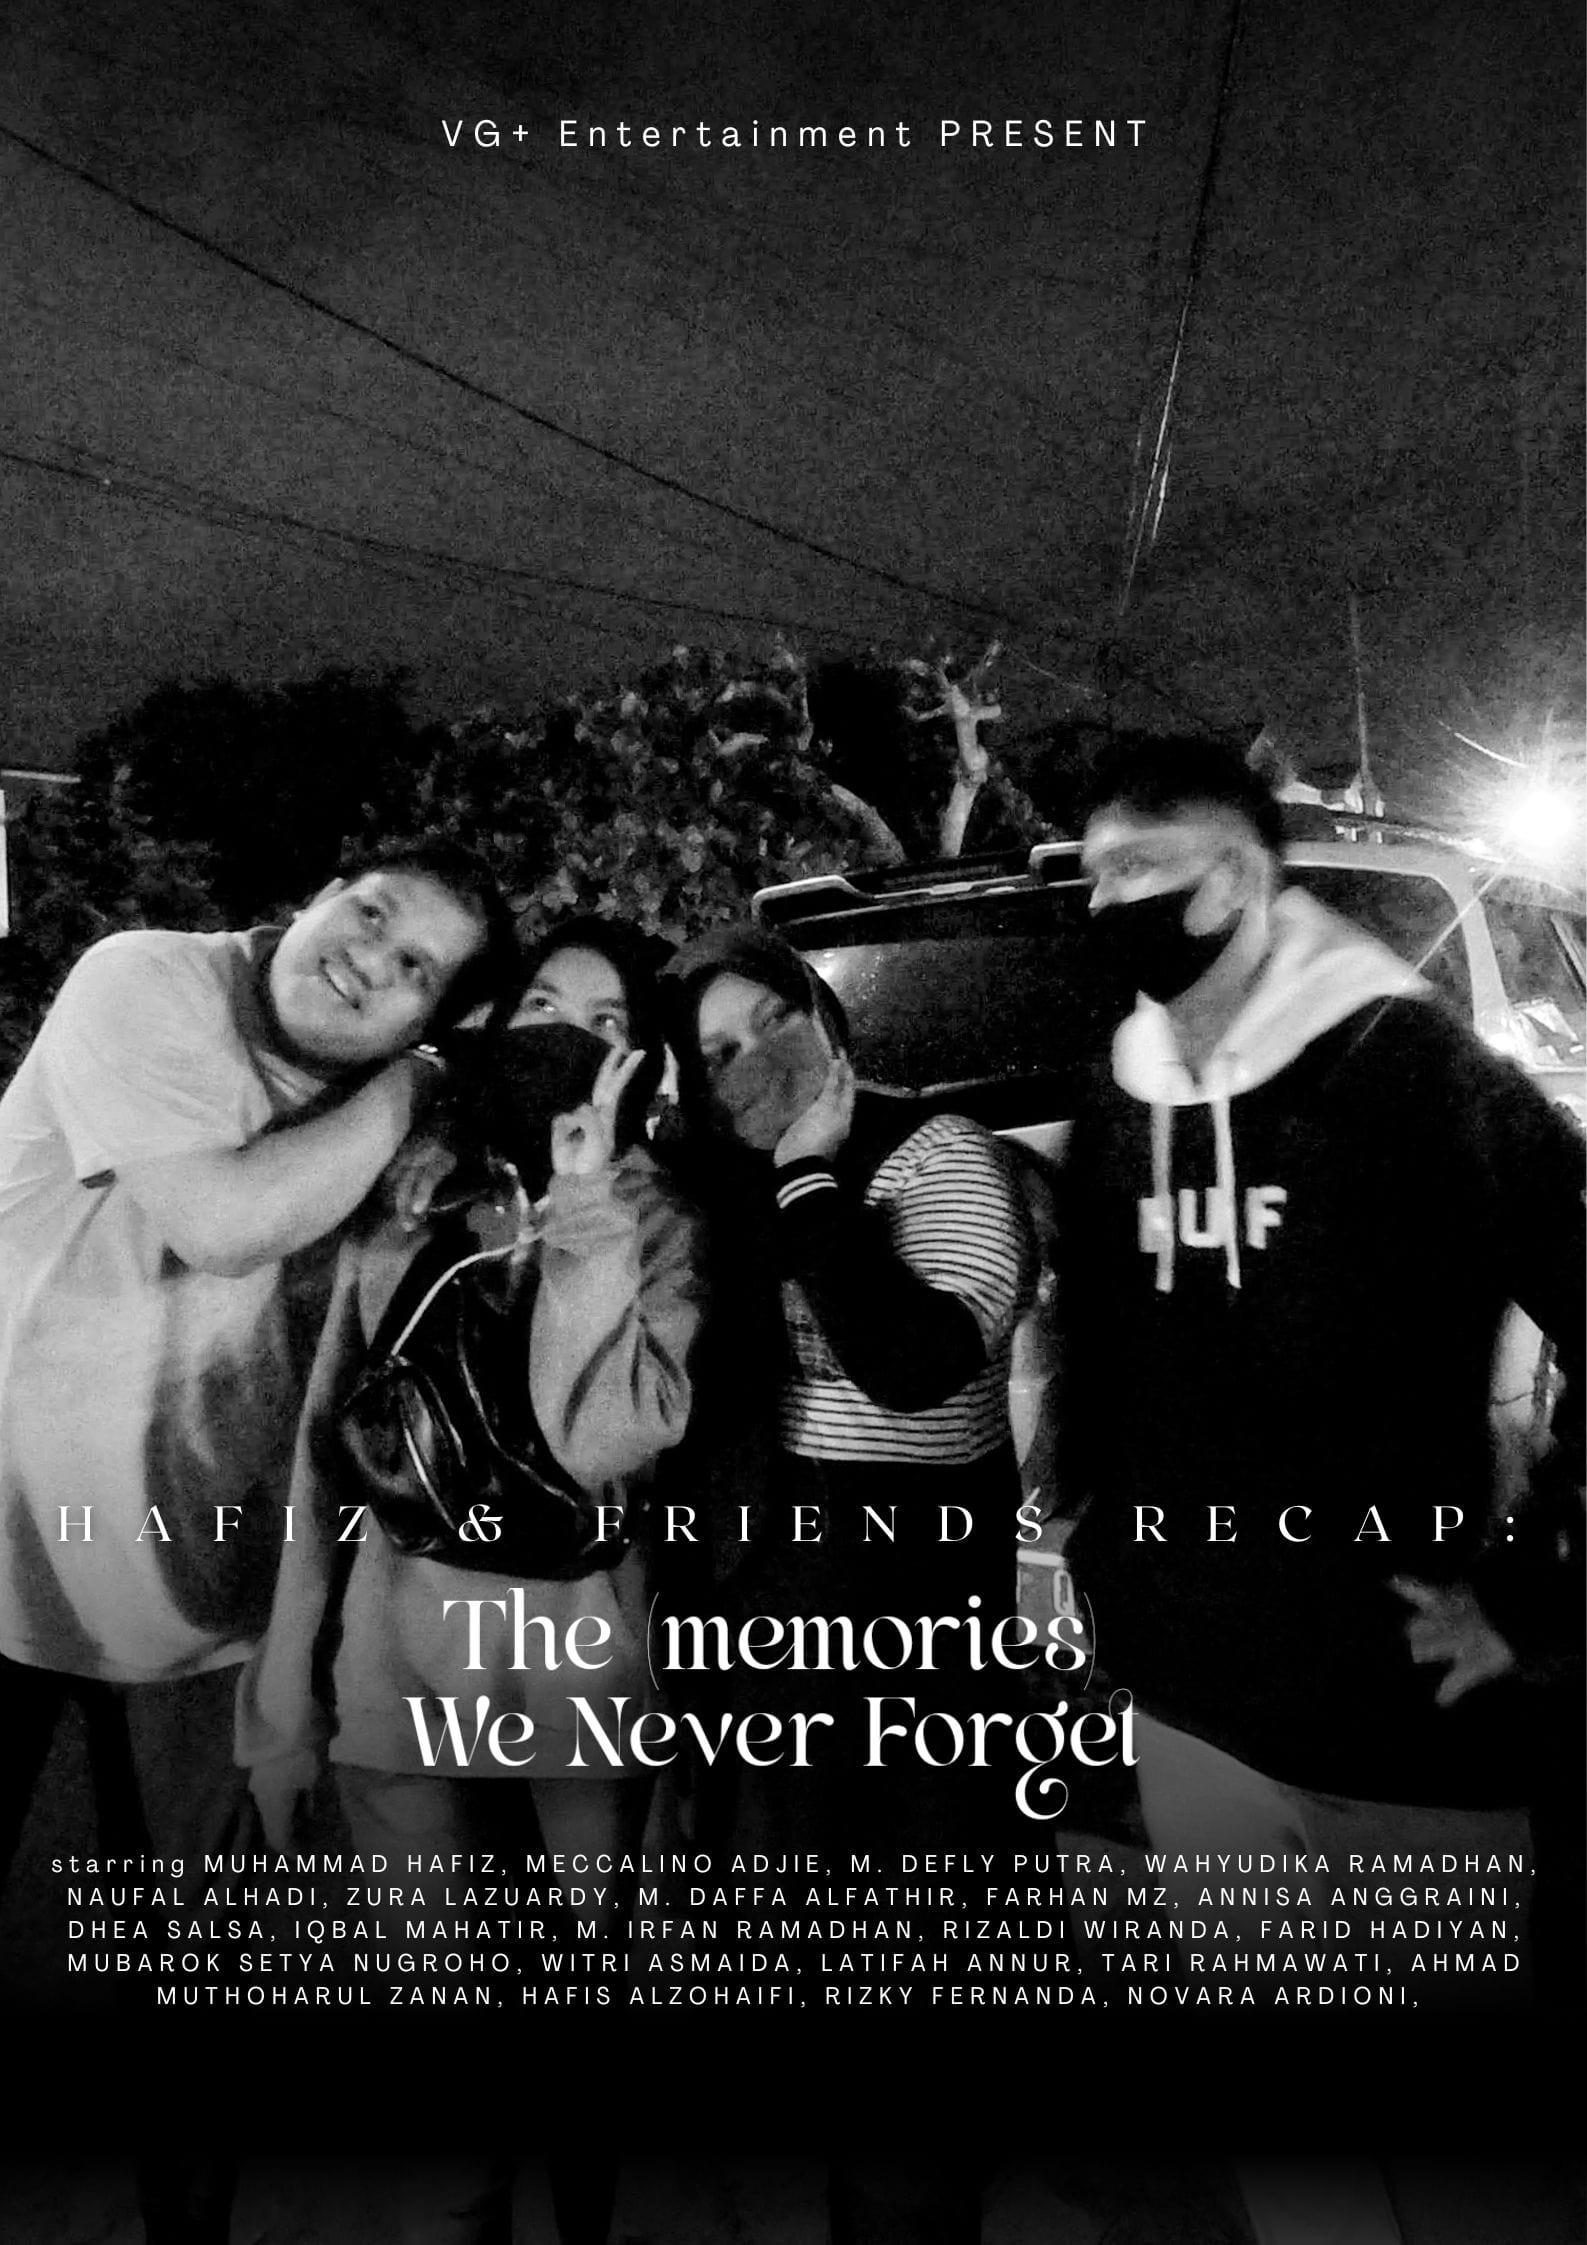 The (memories) We Never Forget poster